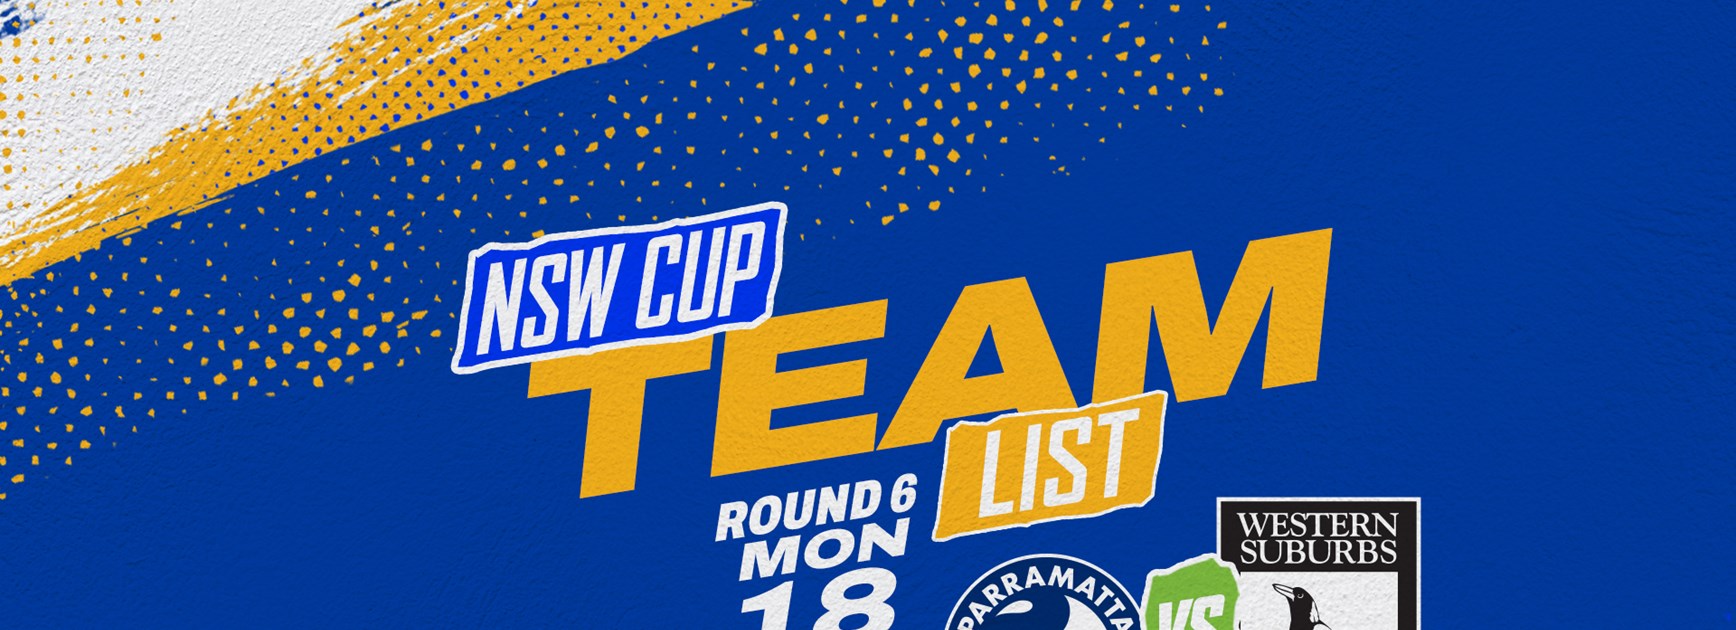 NSW Cup Team List - Eels v Magpies, Round Six